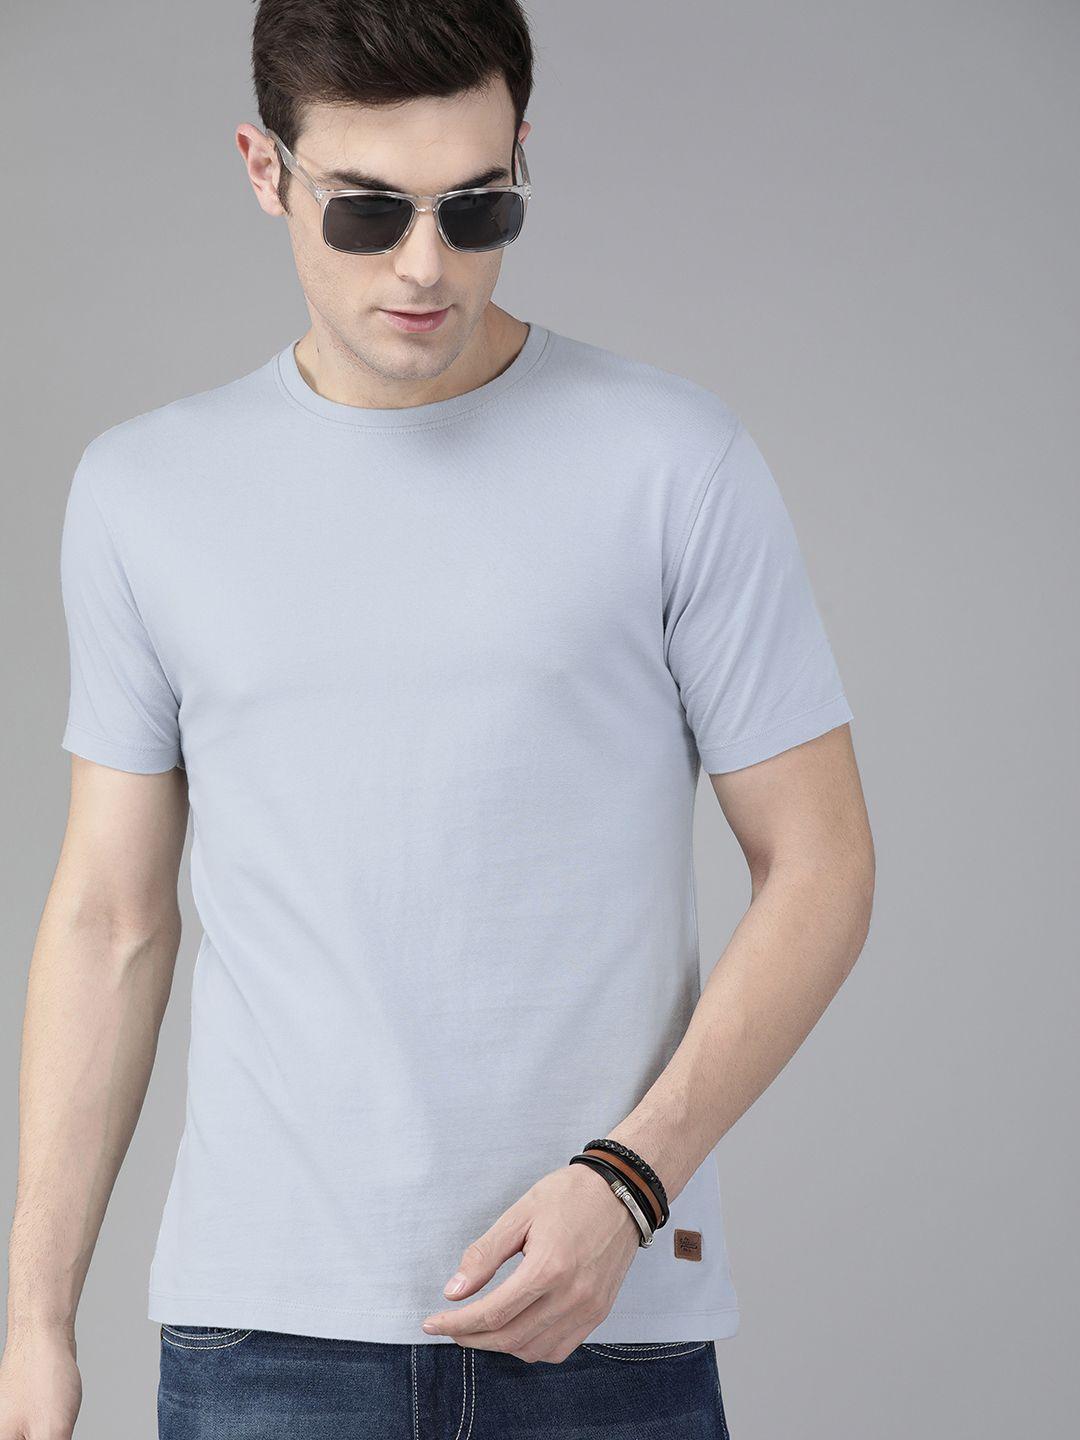 the roadster lifestyle co men blue solid round neck pure cotton t-shirt